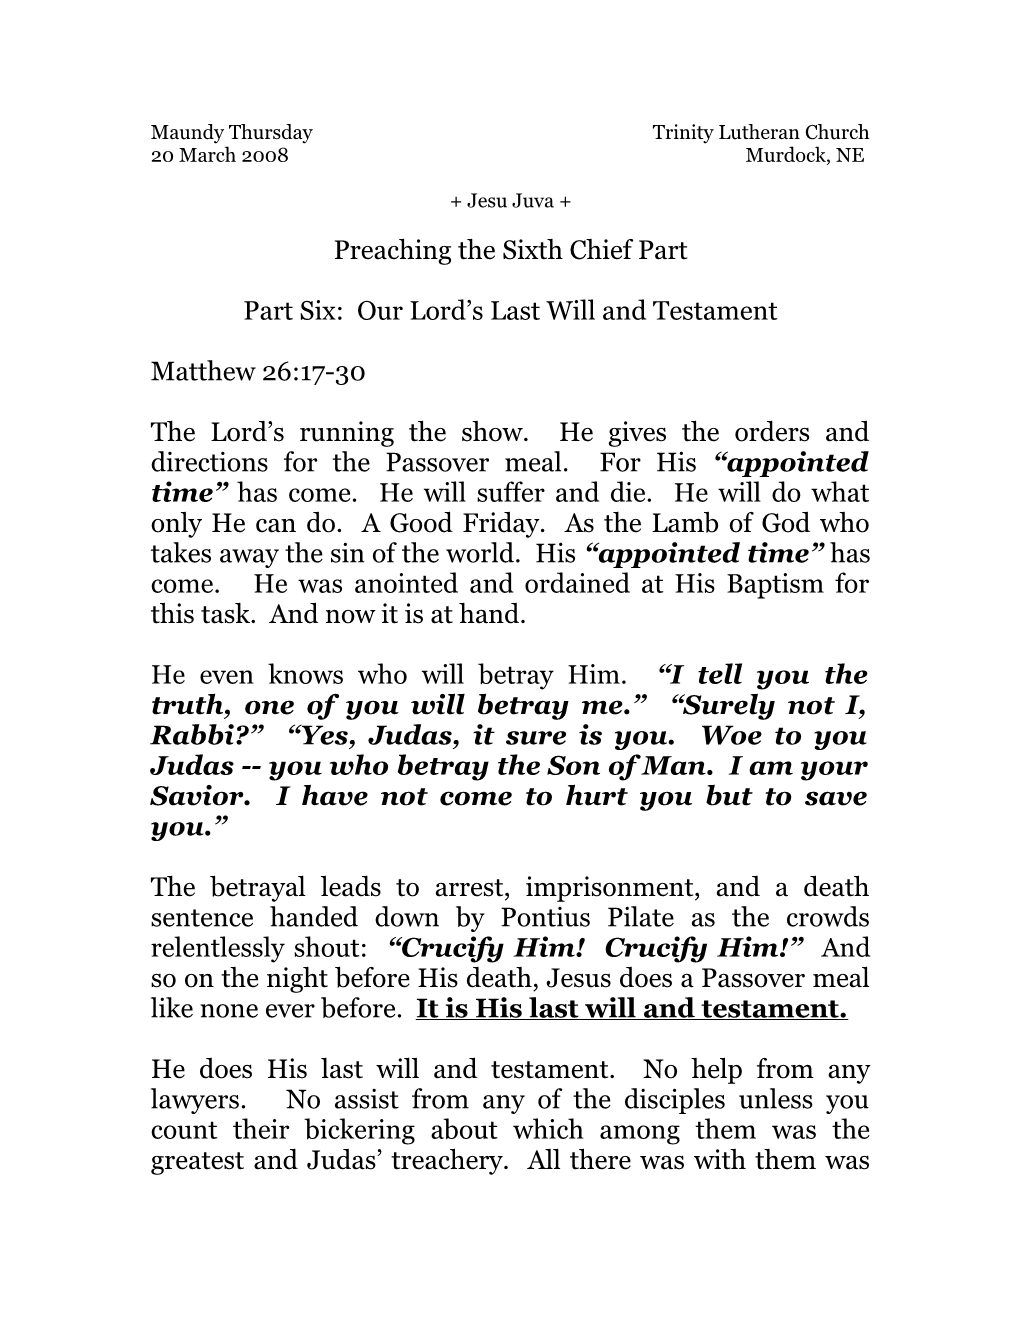 Part Six: Our Lord S Last Will and Testament